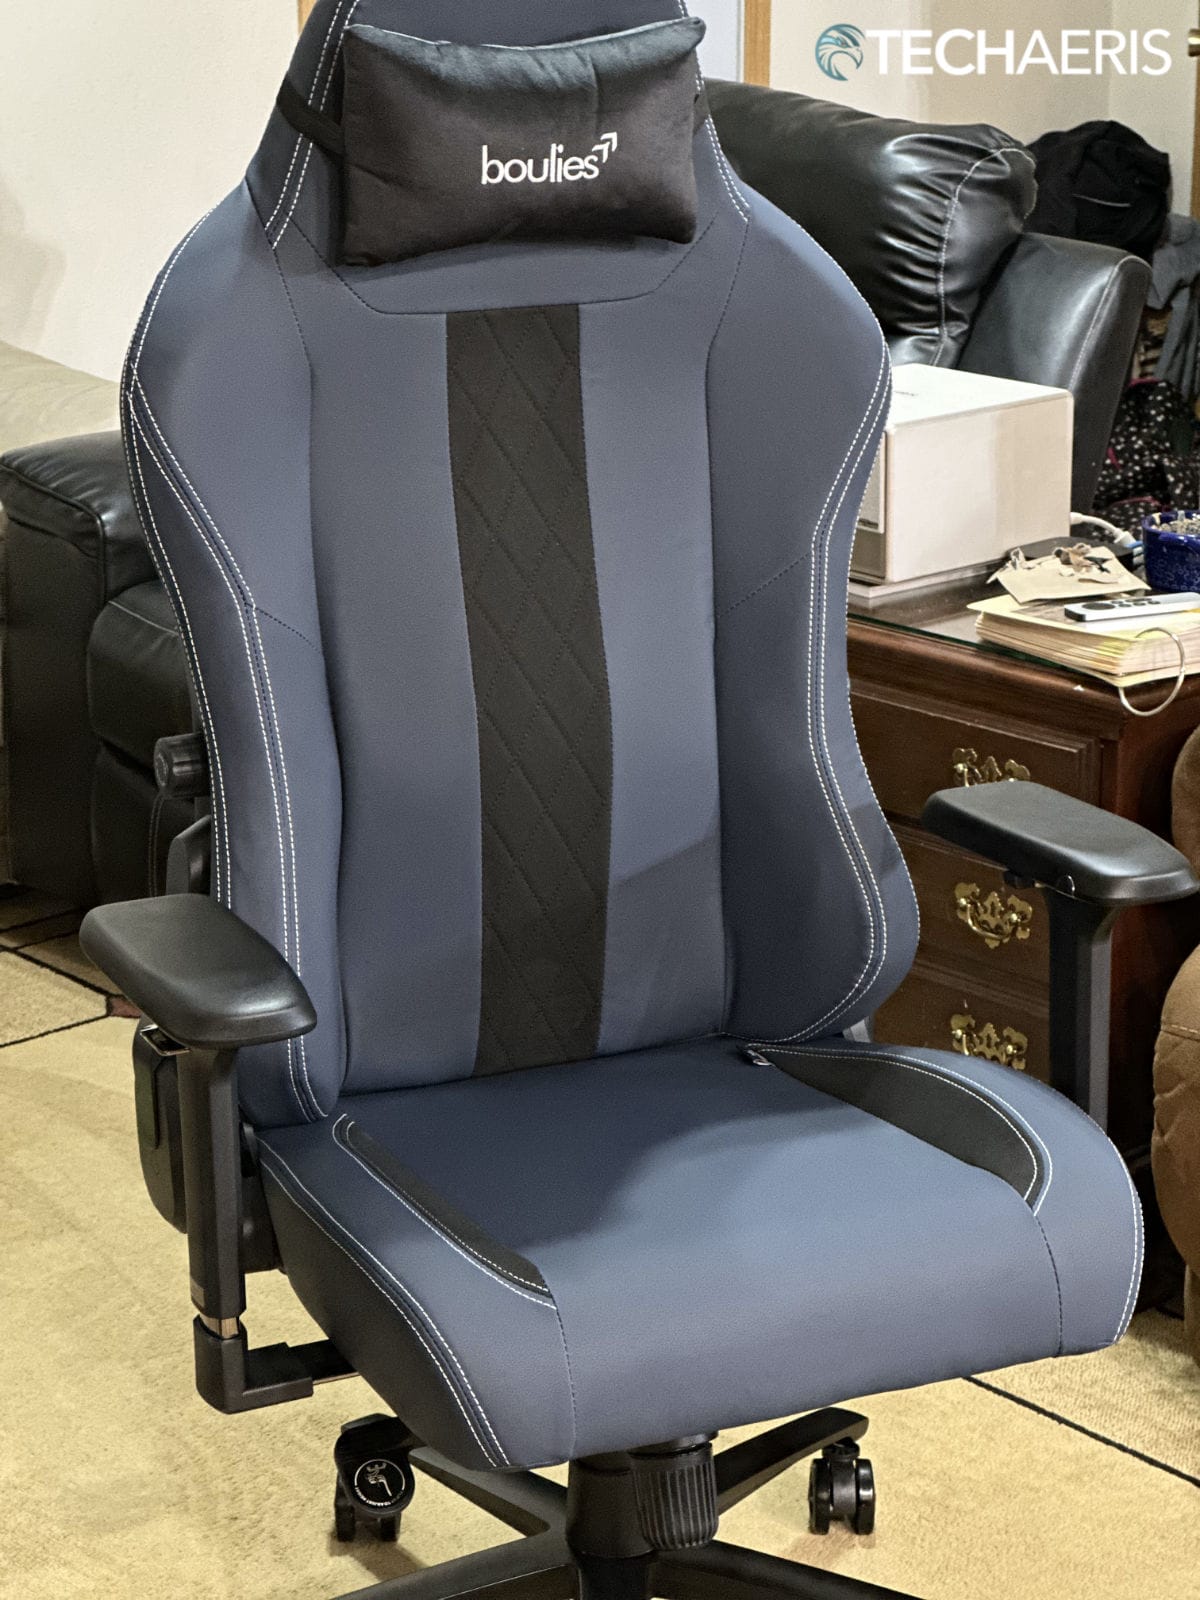 Boulies Master Max review: Another fantastic chair from Boulies